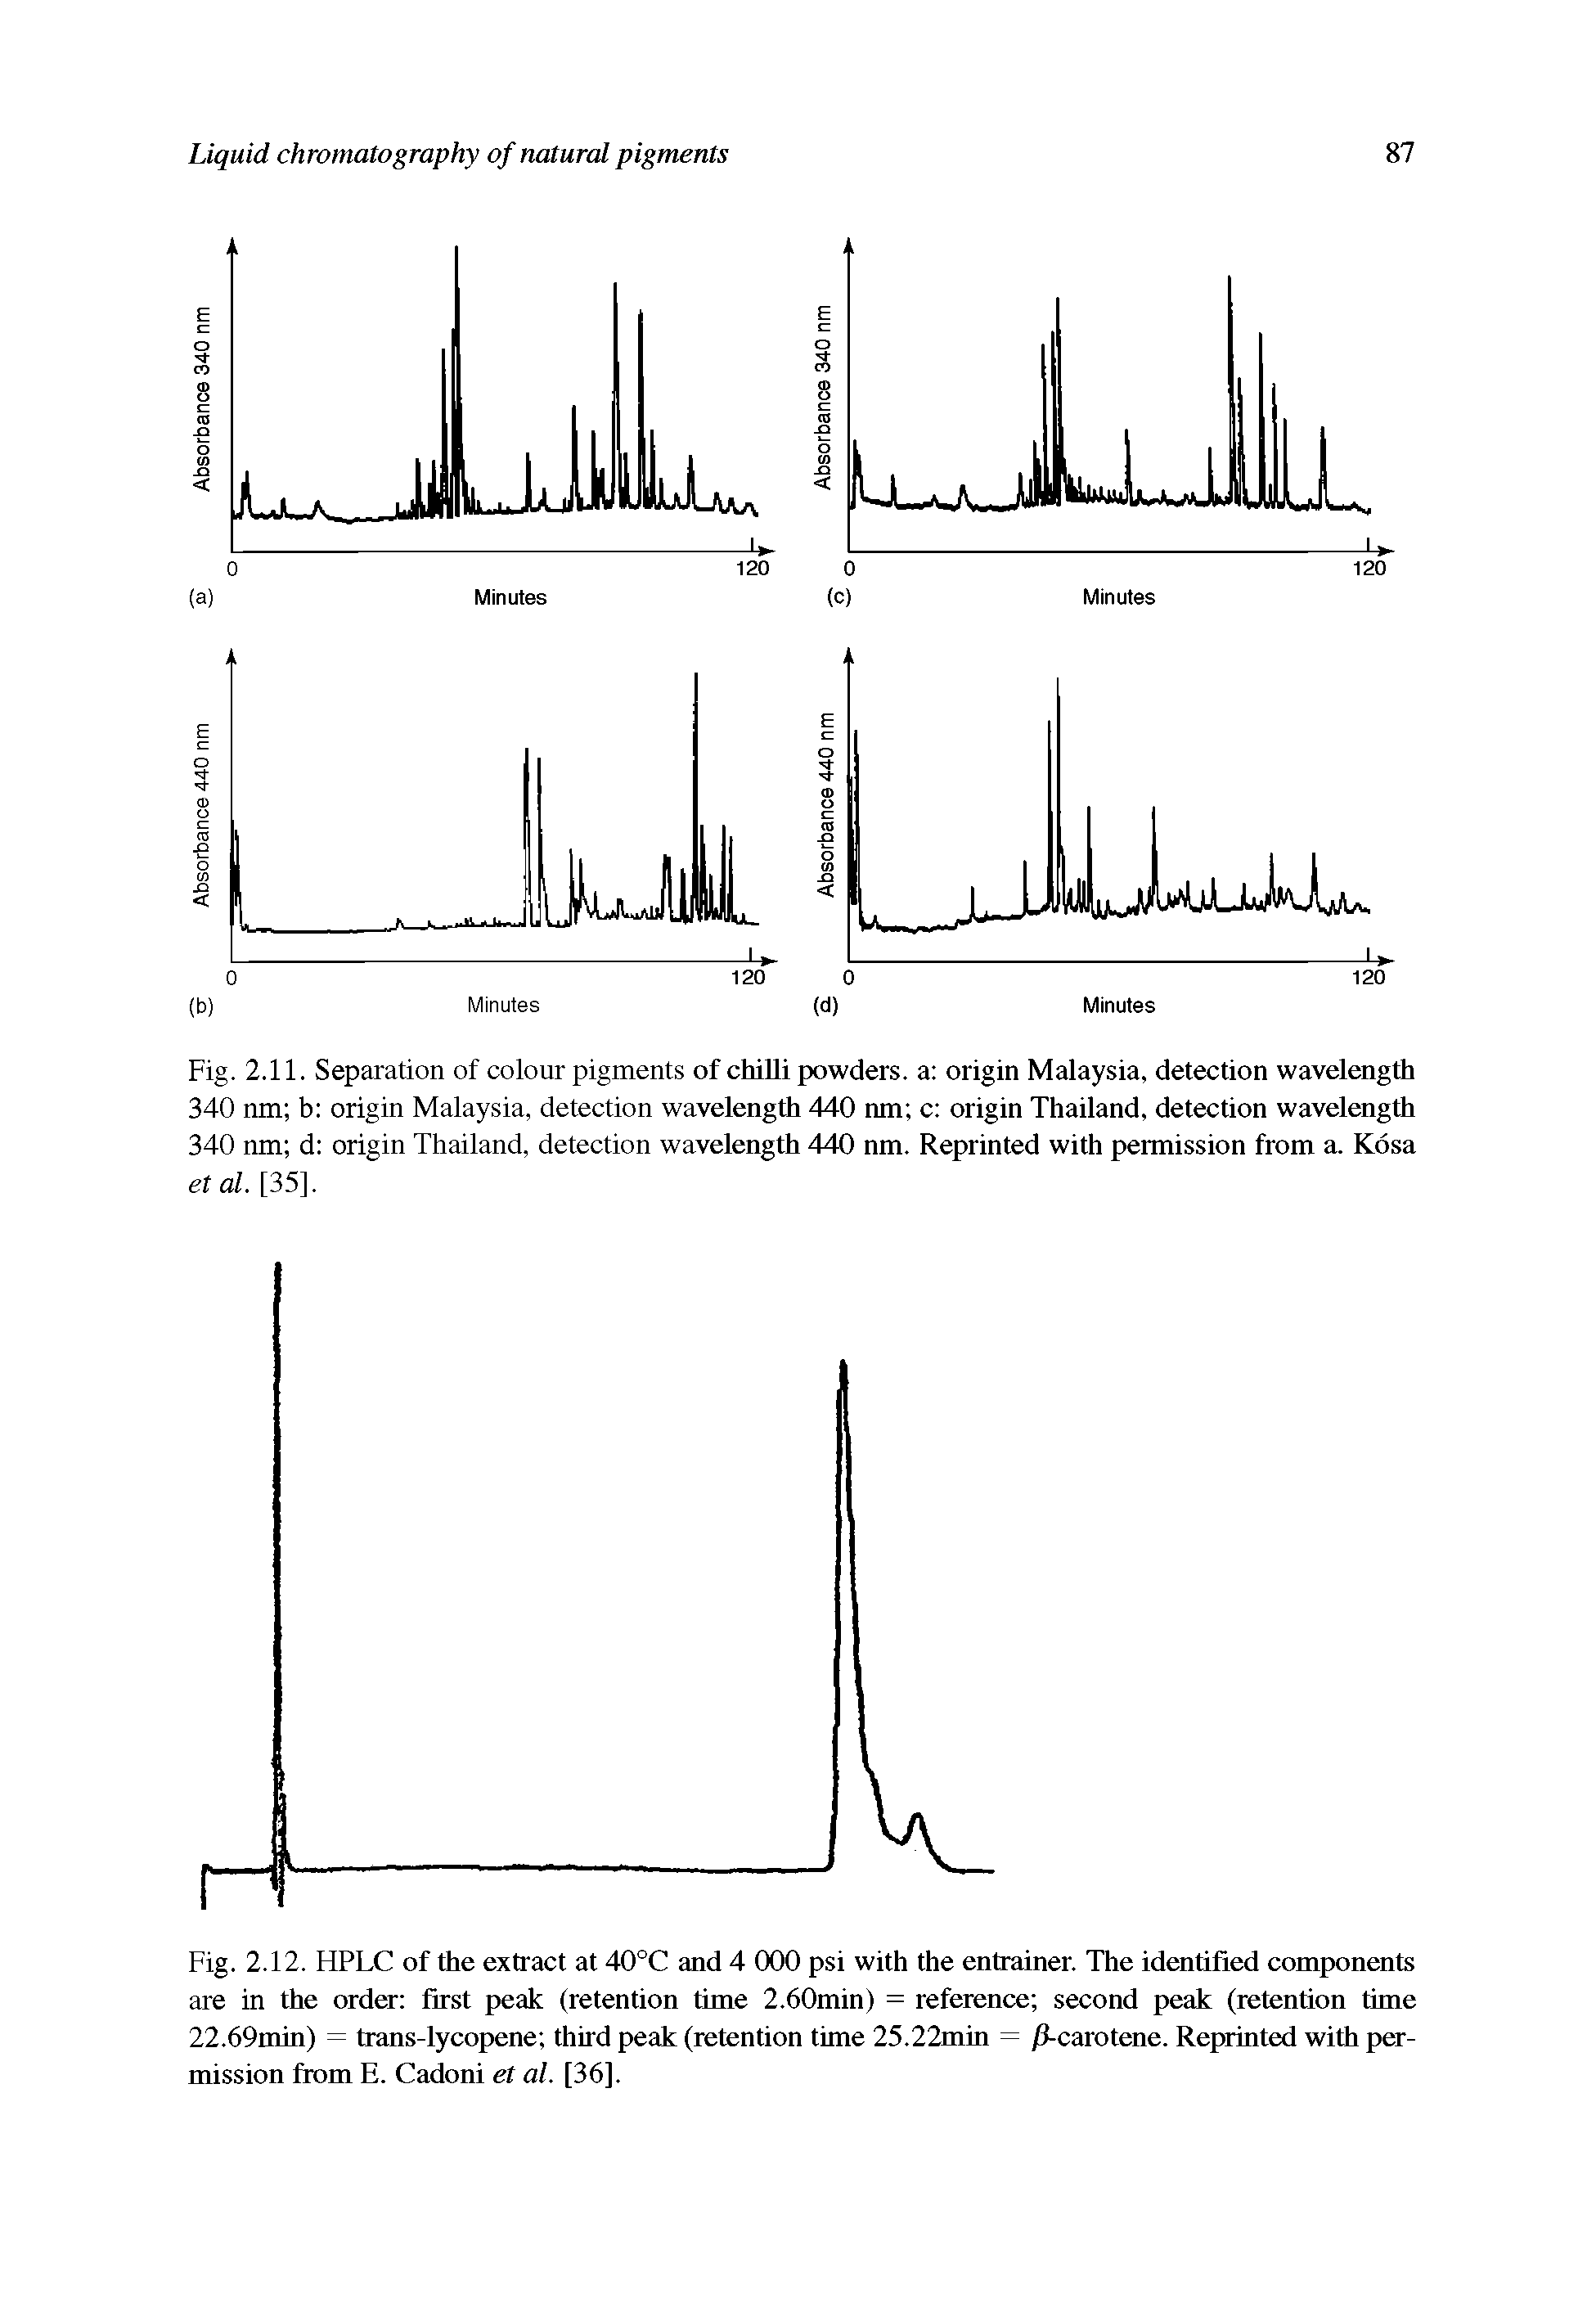 Fig. 2.12. HPLC of the extract at 40°C and 4 000 psi with the entrainer. The identified components are in the order first peak (retention time 2.60min) = reference second peak (retention time 22.69min) = trans-lycopene third peak (retention time 25.22min = /(-carotene. Reprinted with permission from E. Cadoni et al. [36].